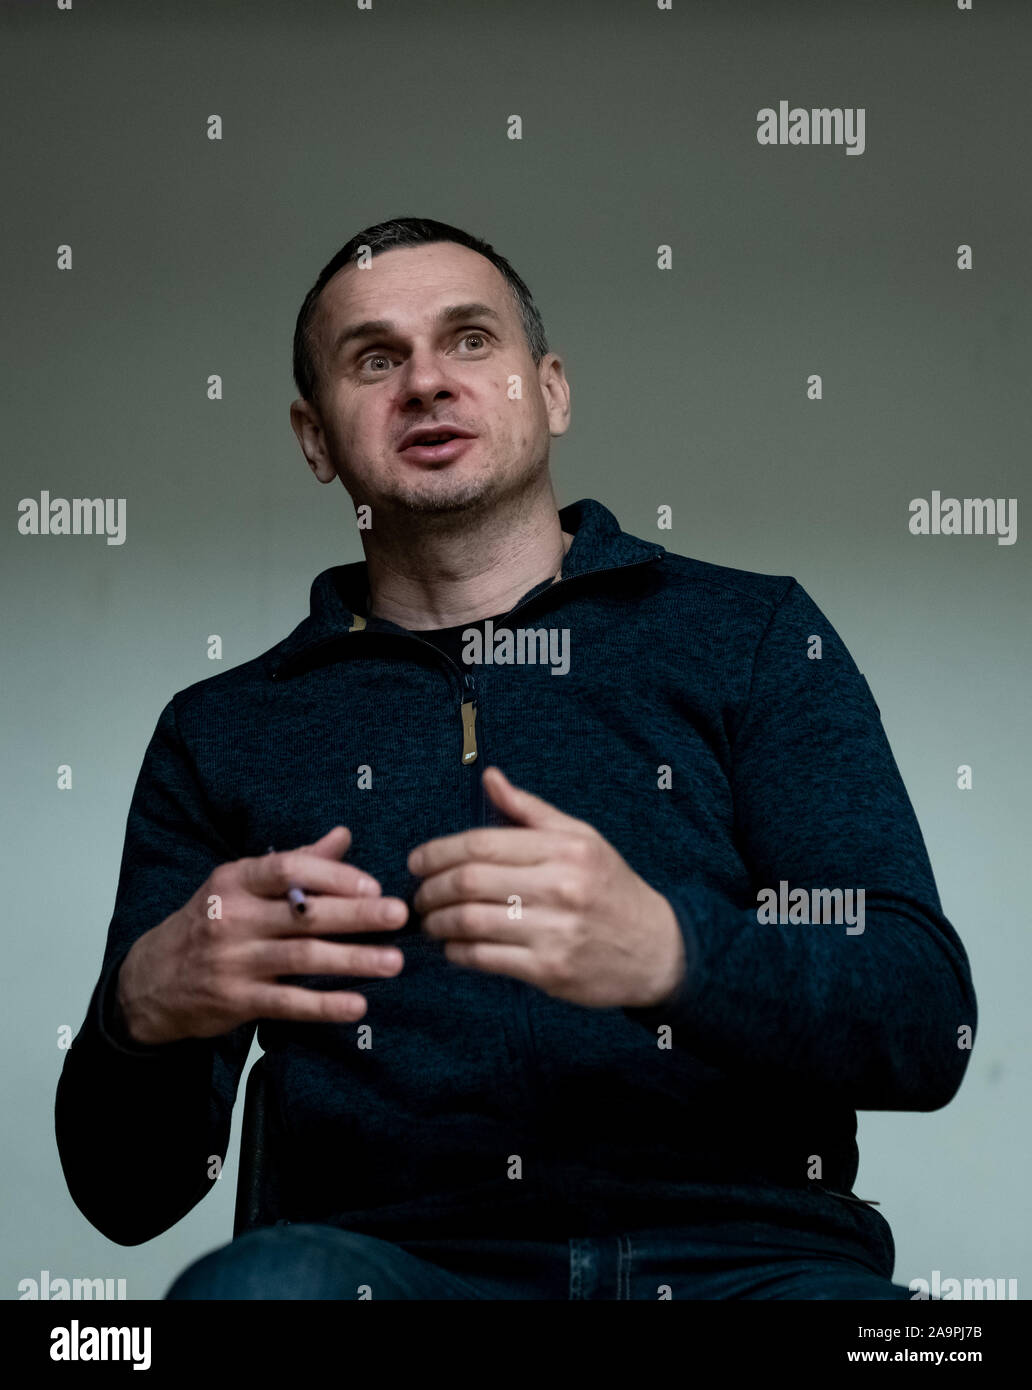 London, UK. 16th November, 2019. Oleg Sentsov speaks and signs copies of his book 'The Marketeer' at the Ukrainian Cultural Centre. Sentsov is a Ukrainian filmmaker, writer and activist from Crimea. Following the Russian annexation of Crimea in 2014 he was arrested in Crimea and sentenced to 20 years' imprisonment by a Russian court on charges of plotting terrorism acts. The conviction was described as fabricated by Amnesty International and others. He was awarded the European Parliament’s Sakharov Prize in 2018. He was released in a prisoner swap. Credit: Guy Corbishley/Alamy Live News Stock Photo